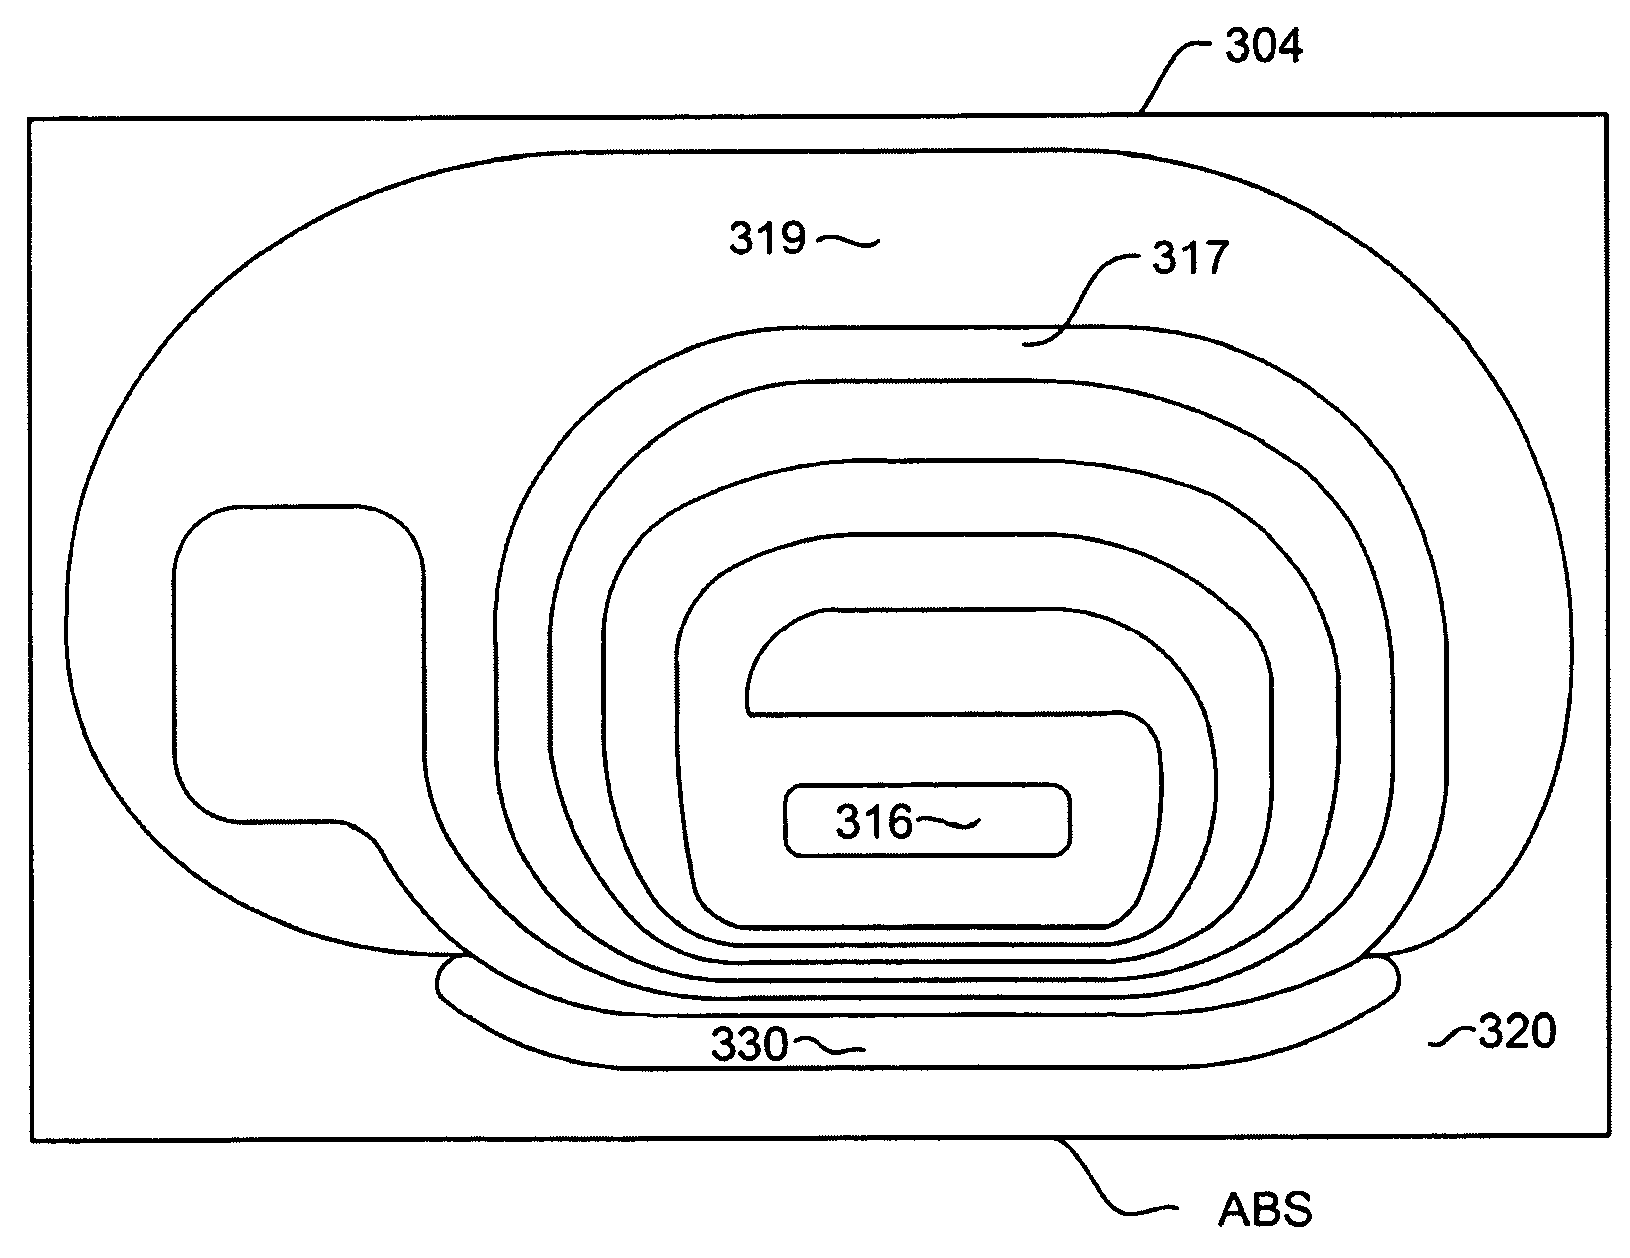 Perpendicular magnetic recording head with photoresist dam between write coil and air bearing surface